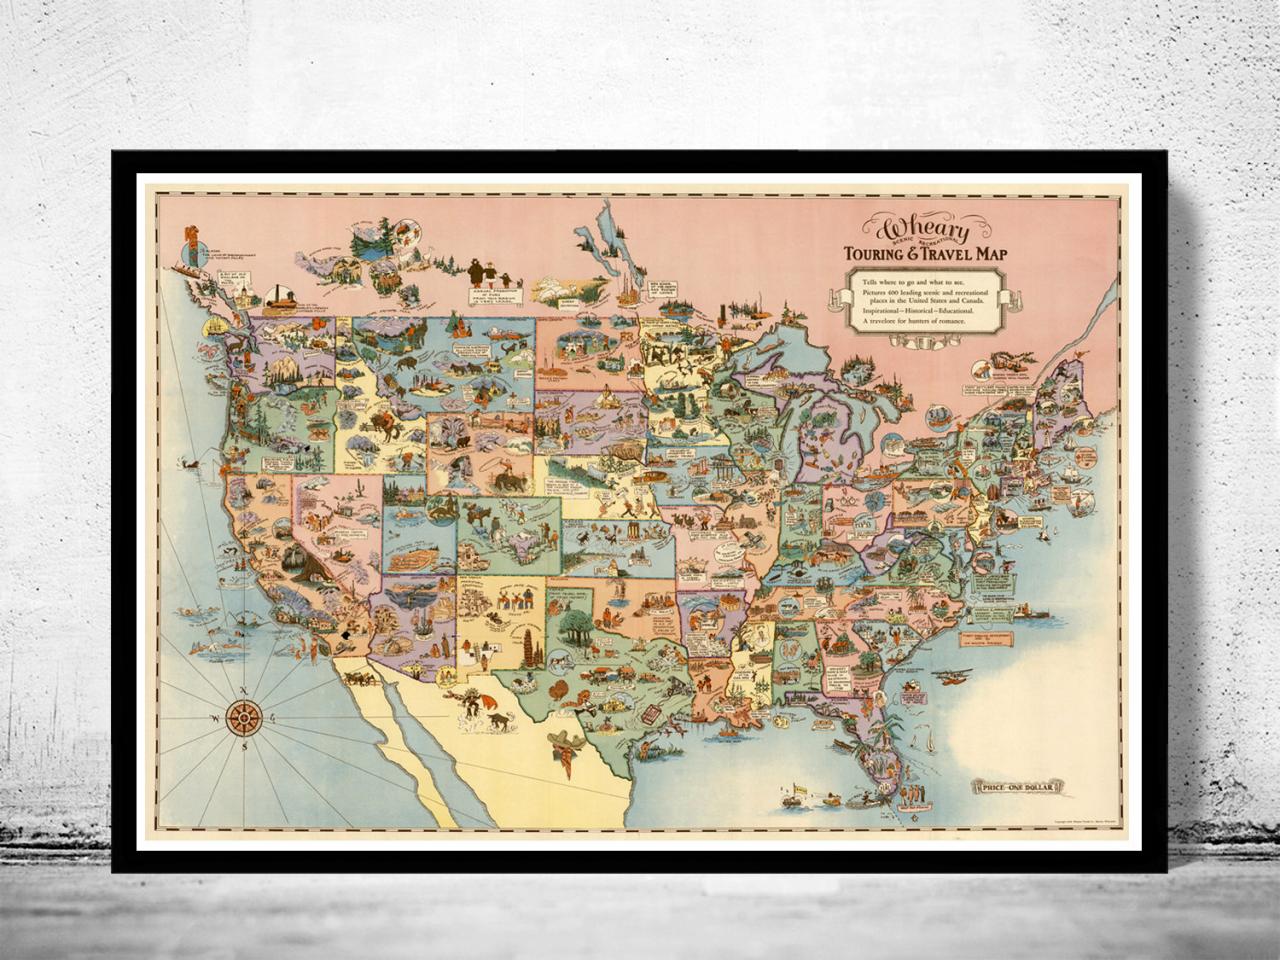 Vintage Map Of United States America, Recreational Touring & Travel Map 1928